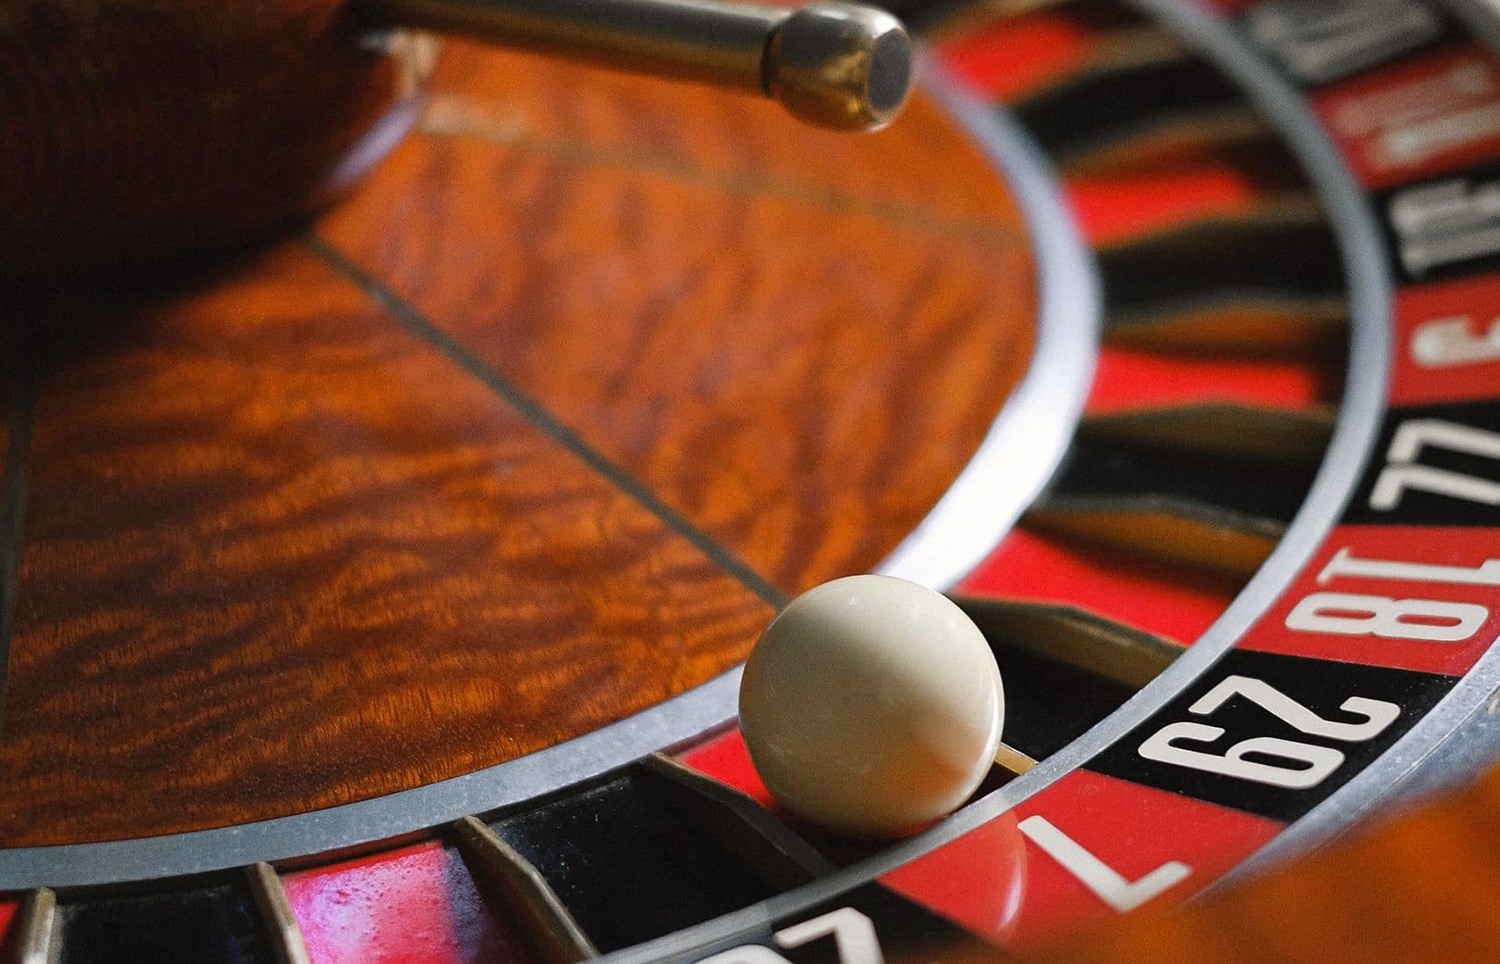 horizontal image of a close up photo of a roulette wheel with the ball in number 7 red